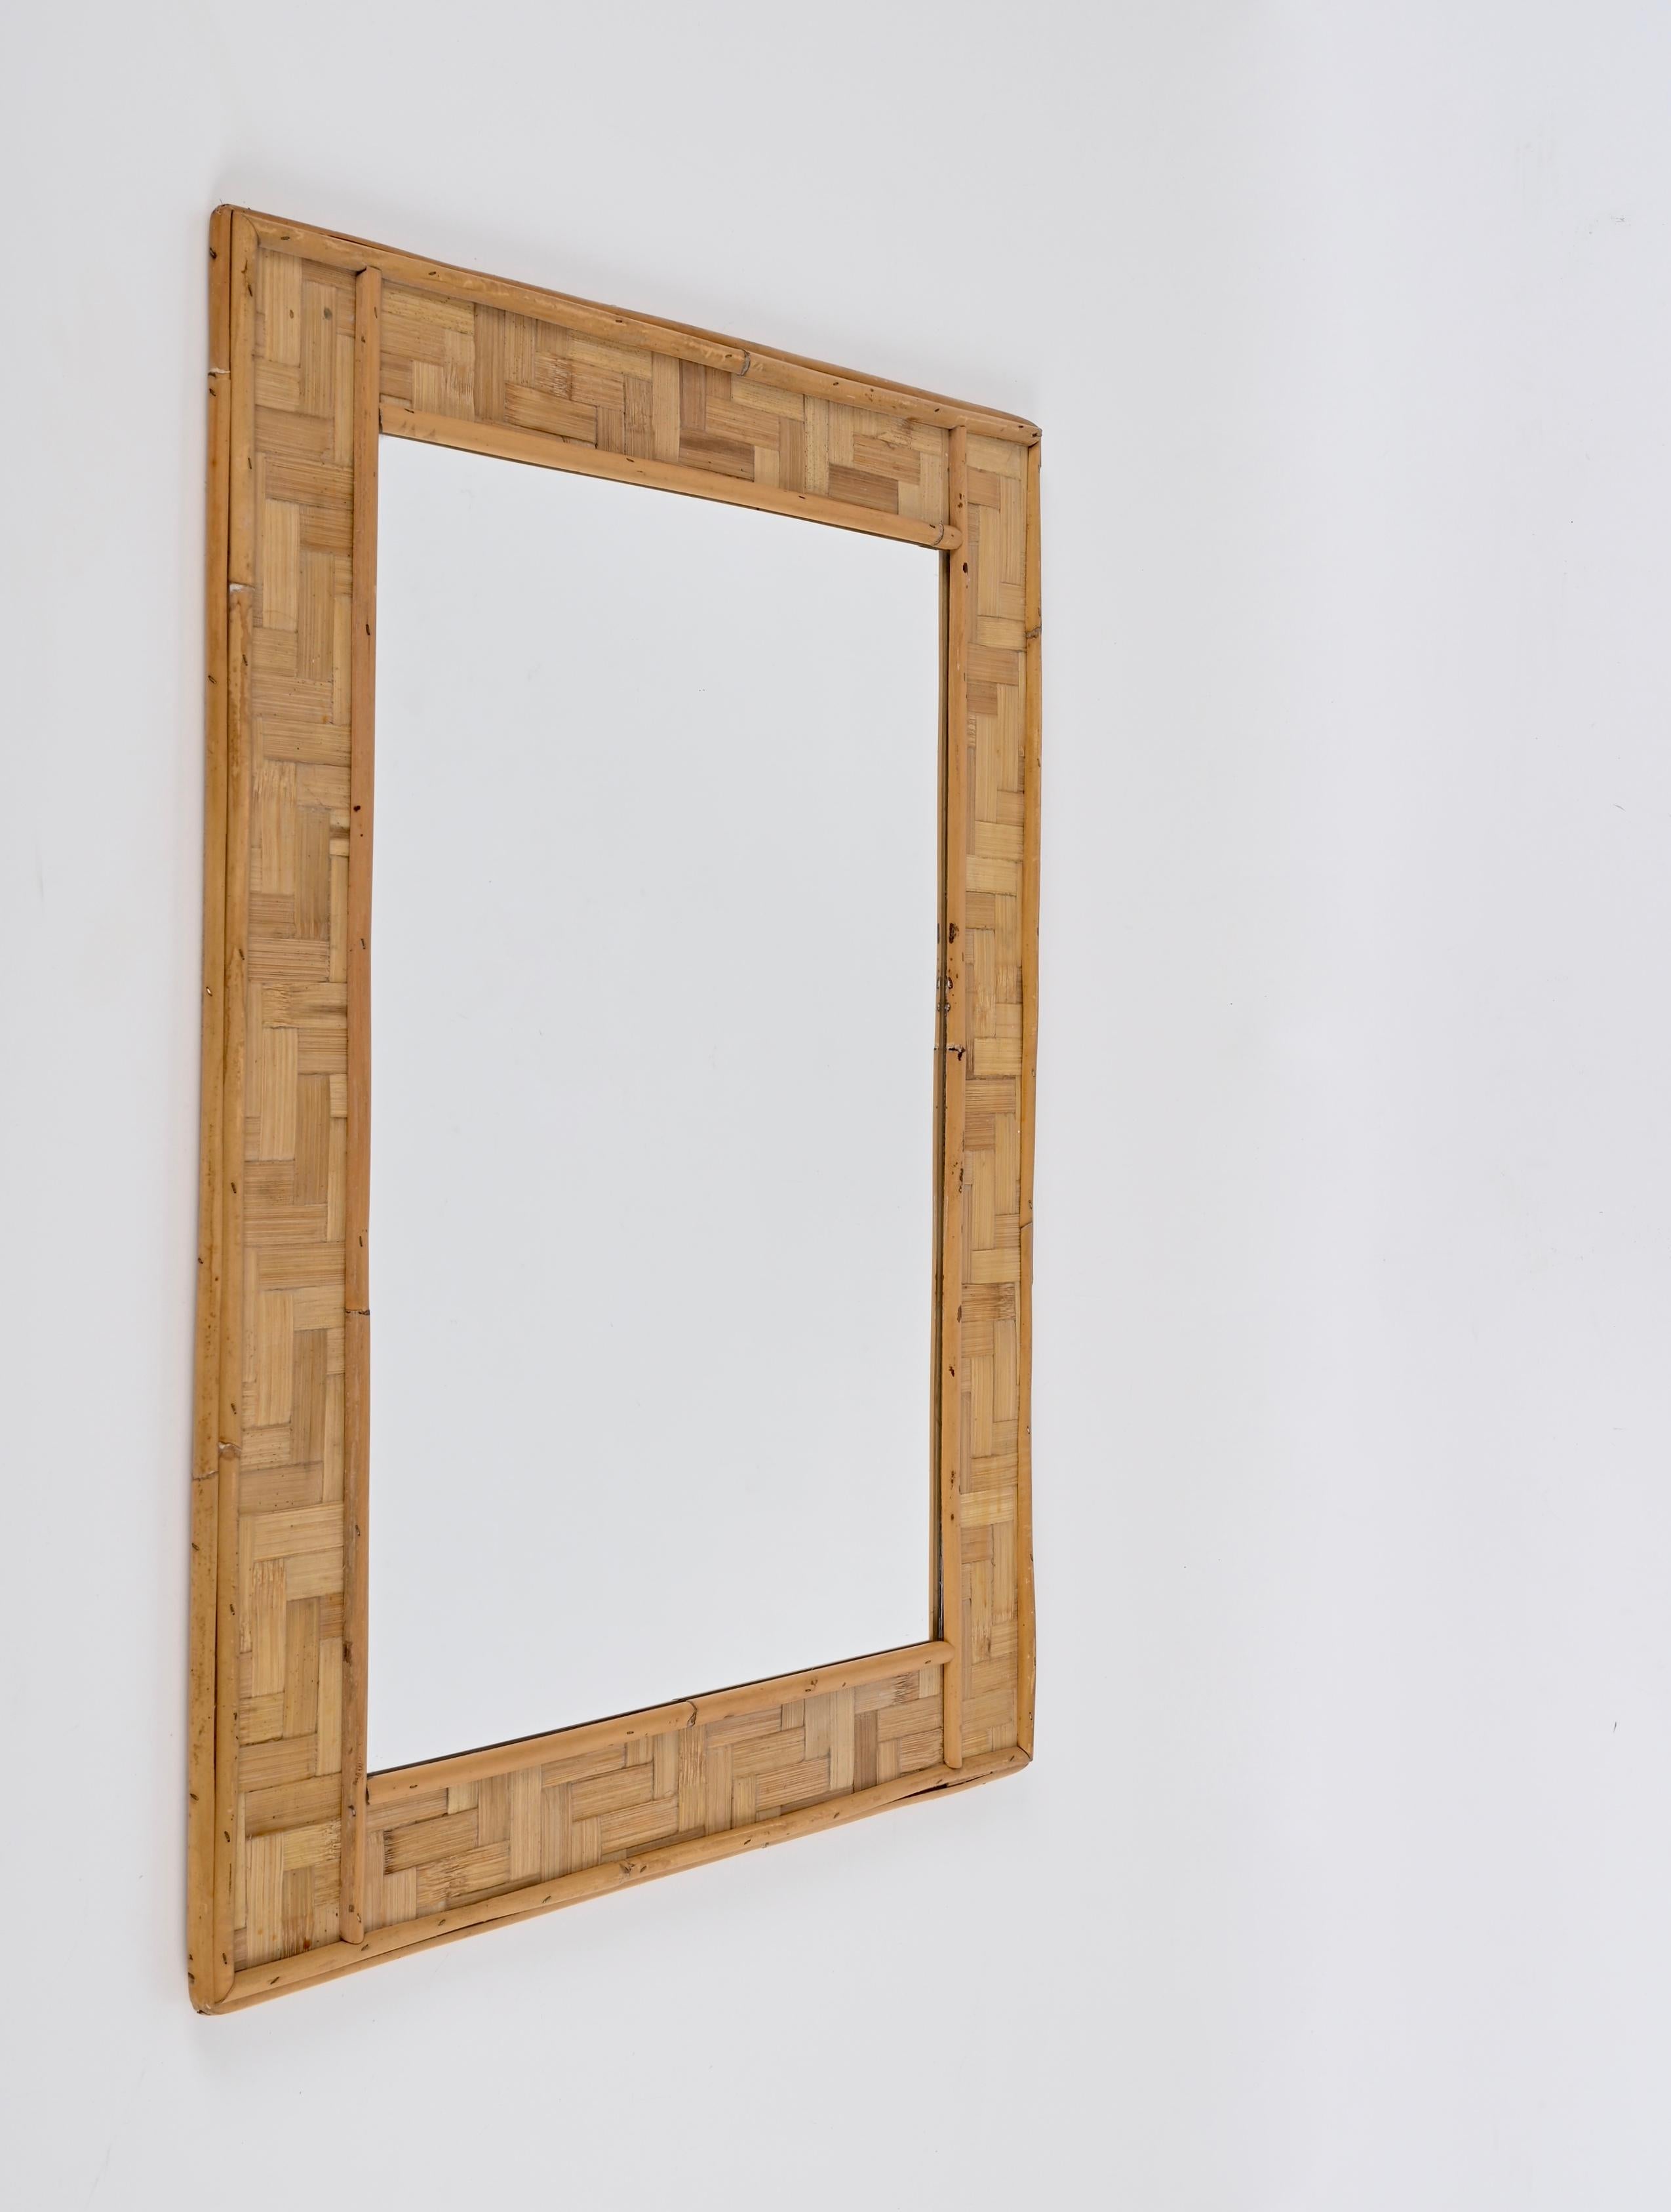 Midcentury Rectangular Bamboo and Woven Rattan Frame Italian Mirror, 1960s For Sale 5